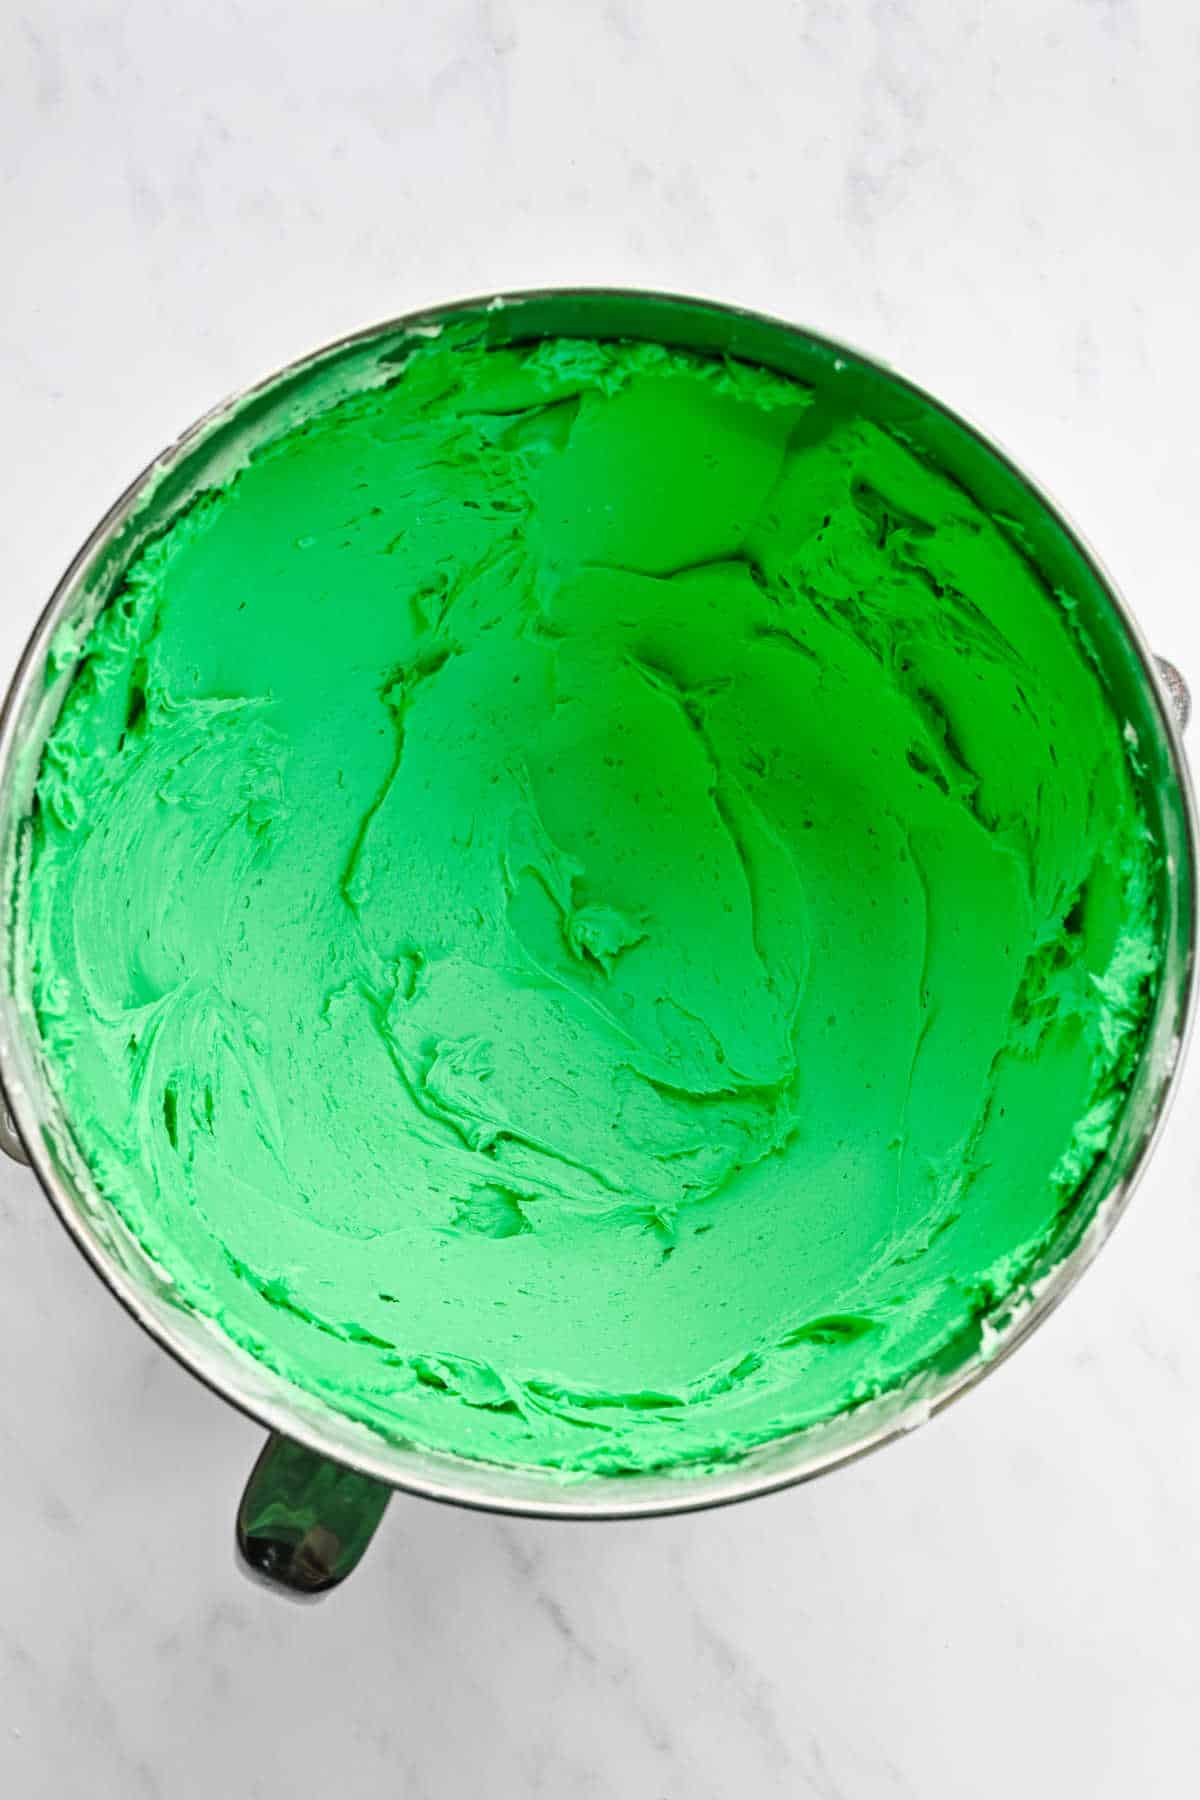 Green food coloring beaten into buttercream frosting.